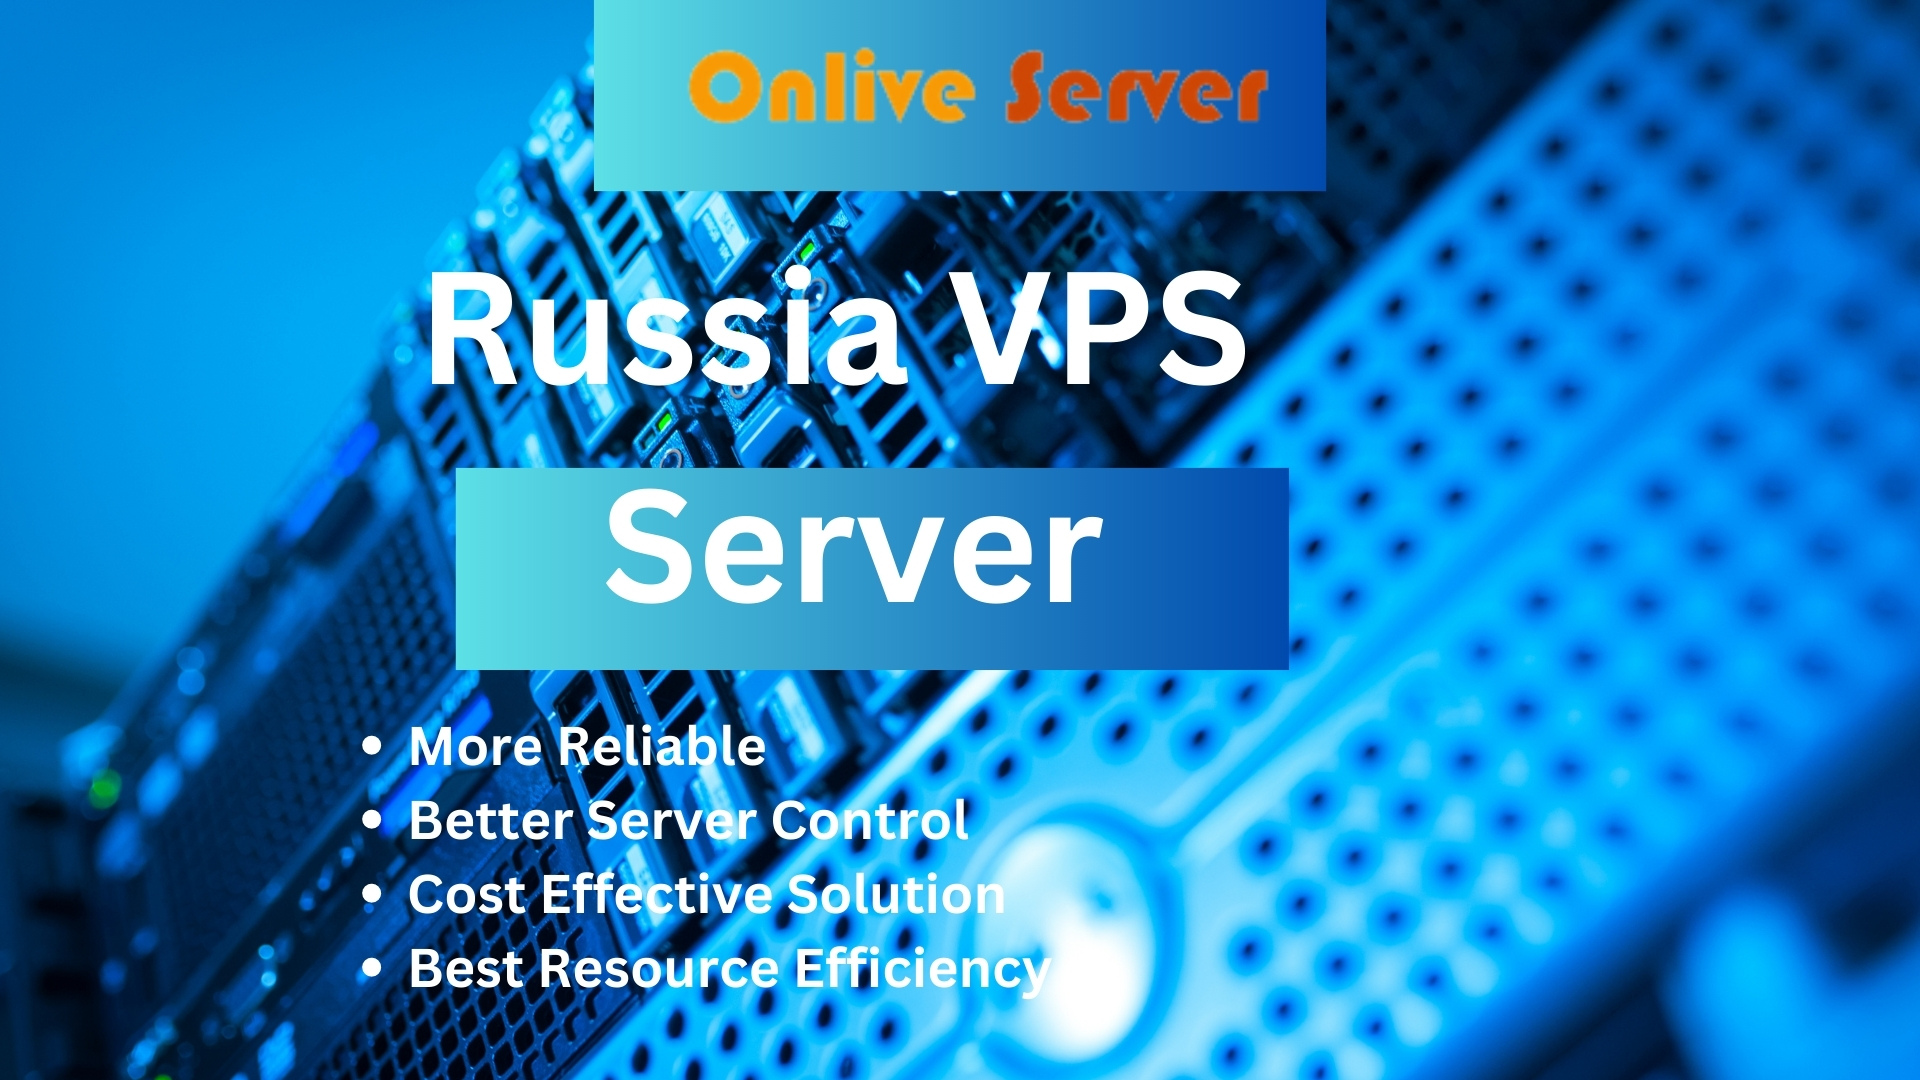 Elevate Your Business with Russia VPS Server from Onlive Server